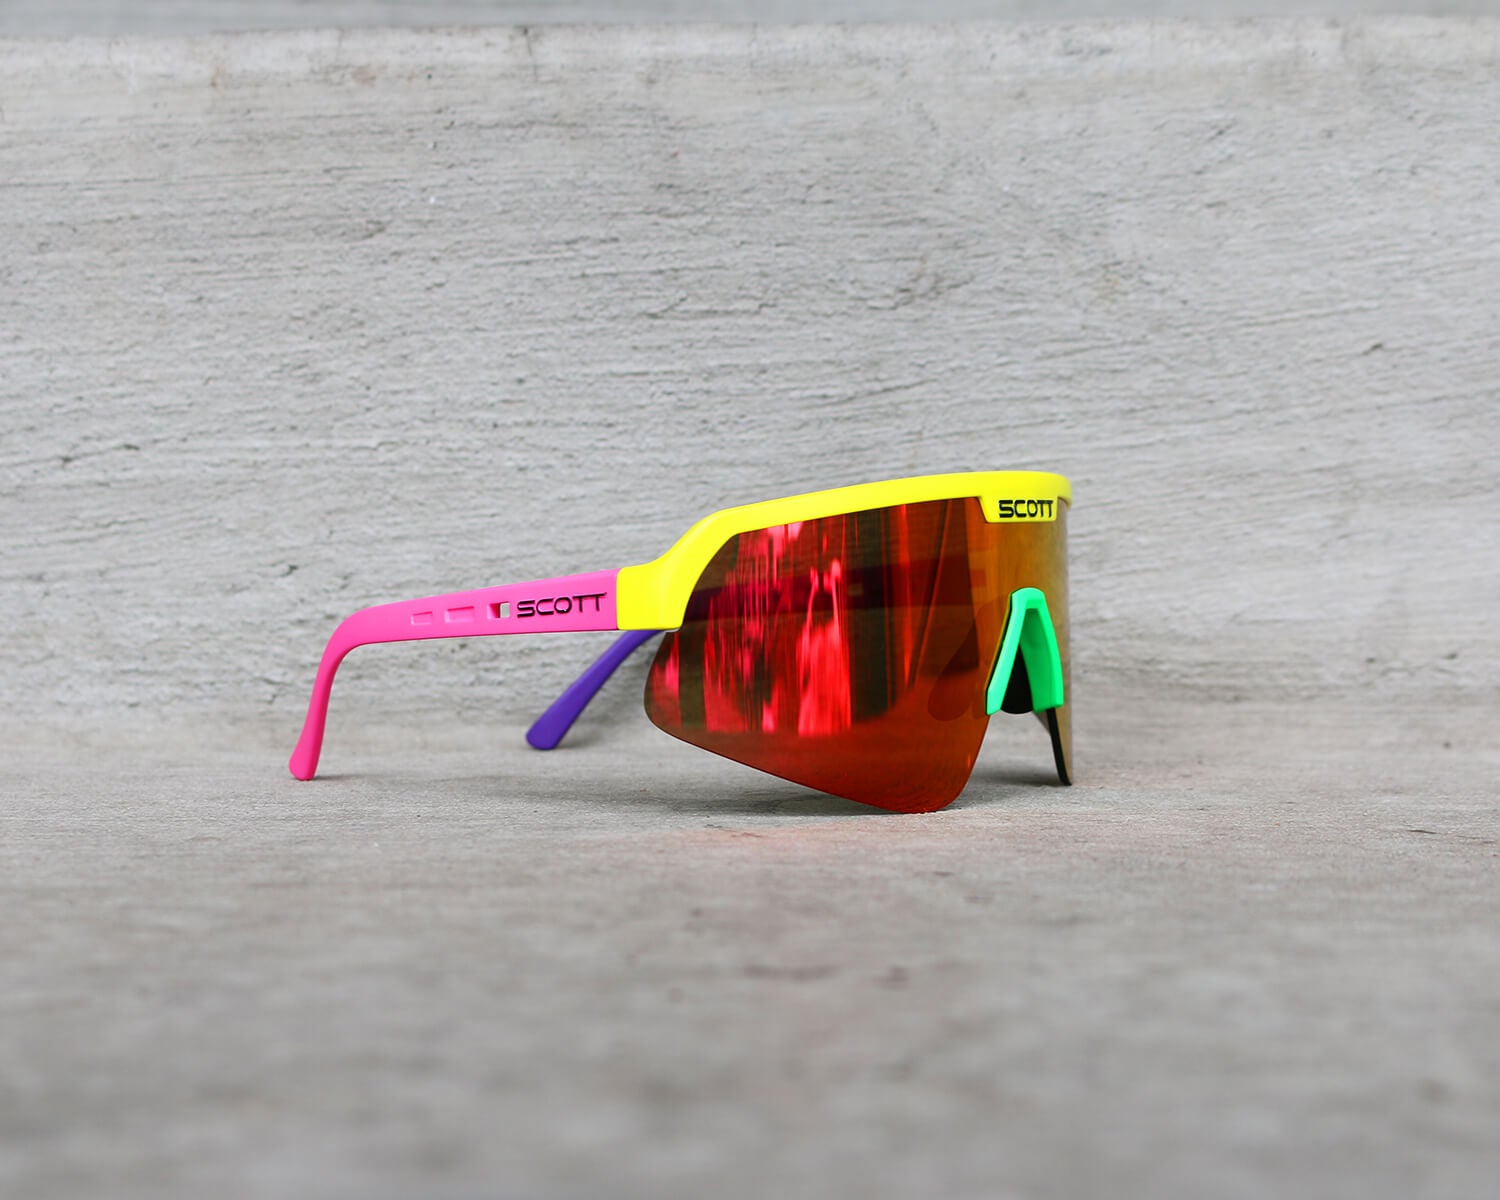 Throwing It Back With the SCOTT 60th Anniversary Throwback Sunglasses